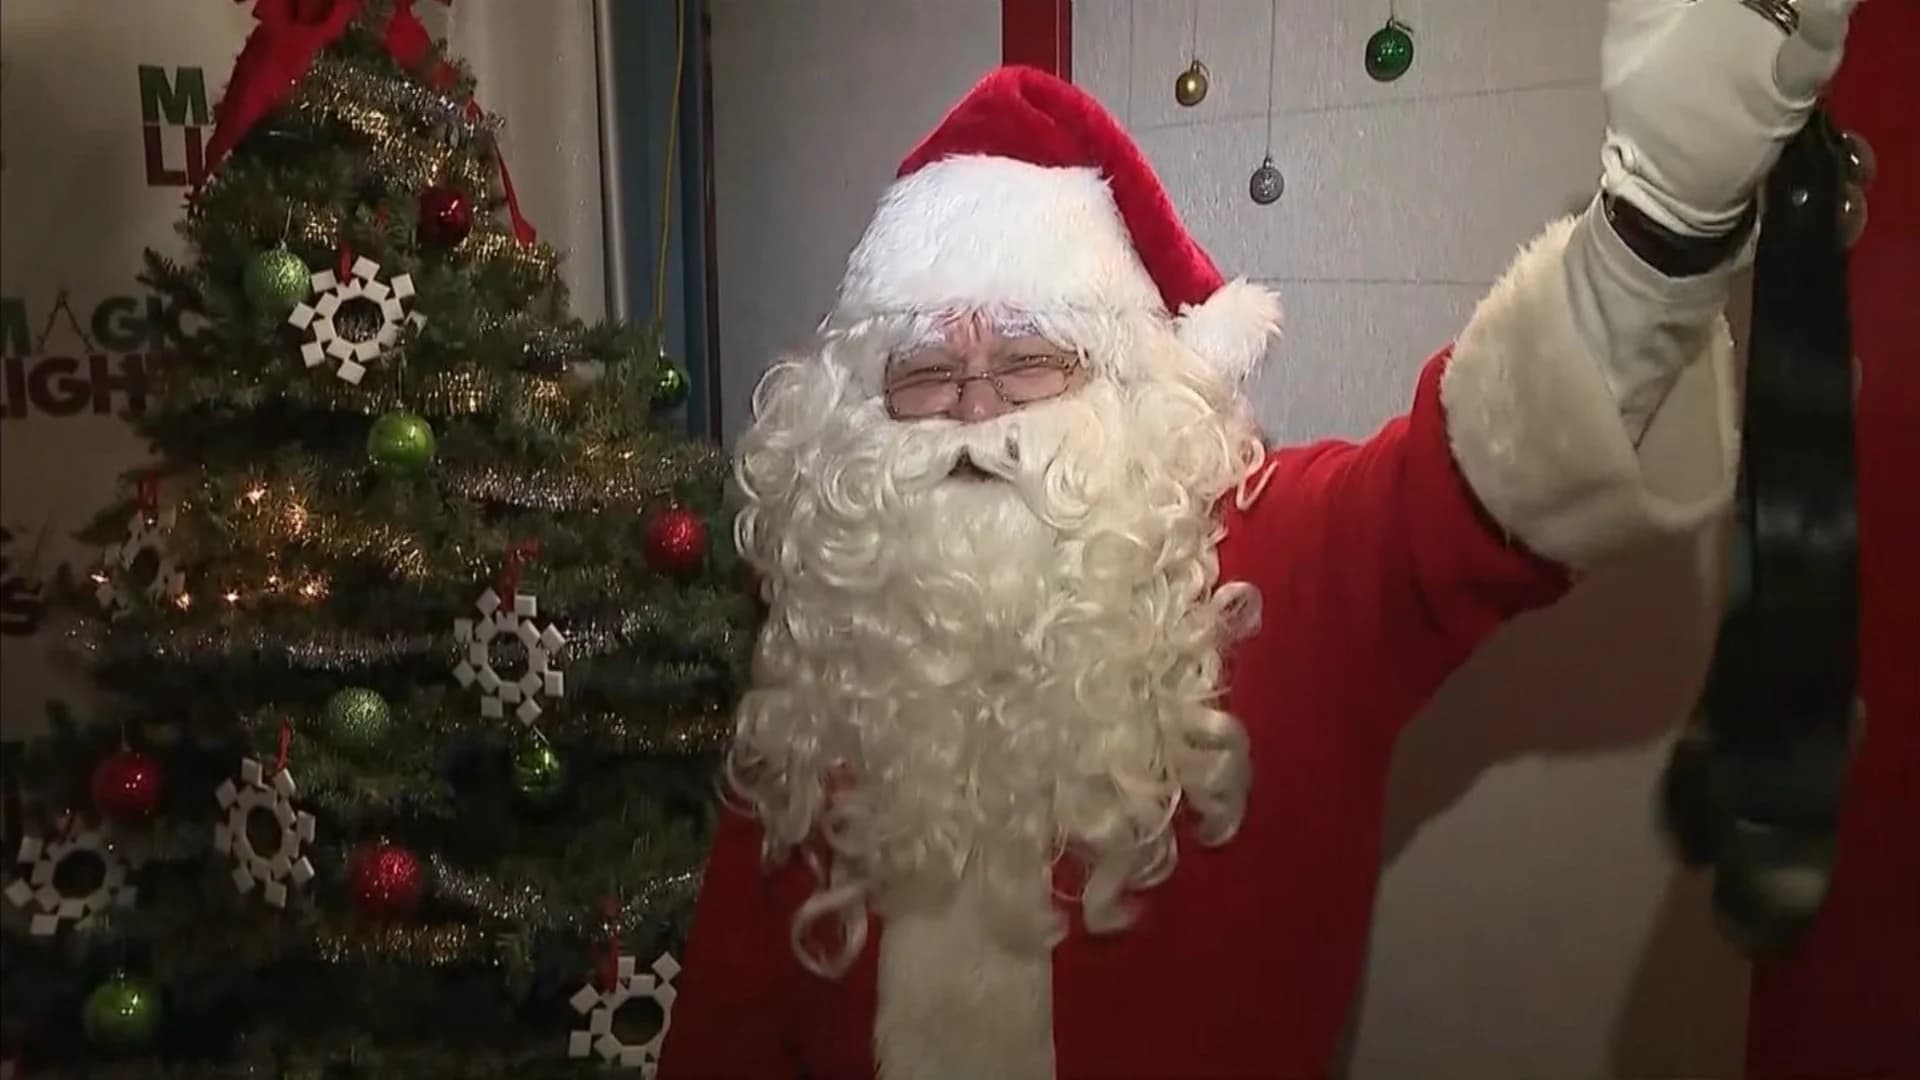 Survey: 27 percent of people would ‘rebrand’ Santa as gender other than male